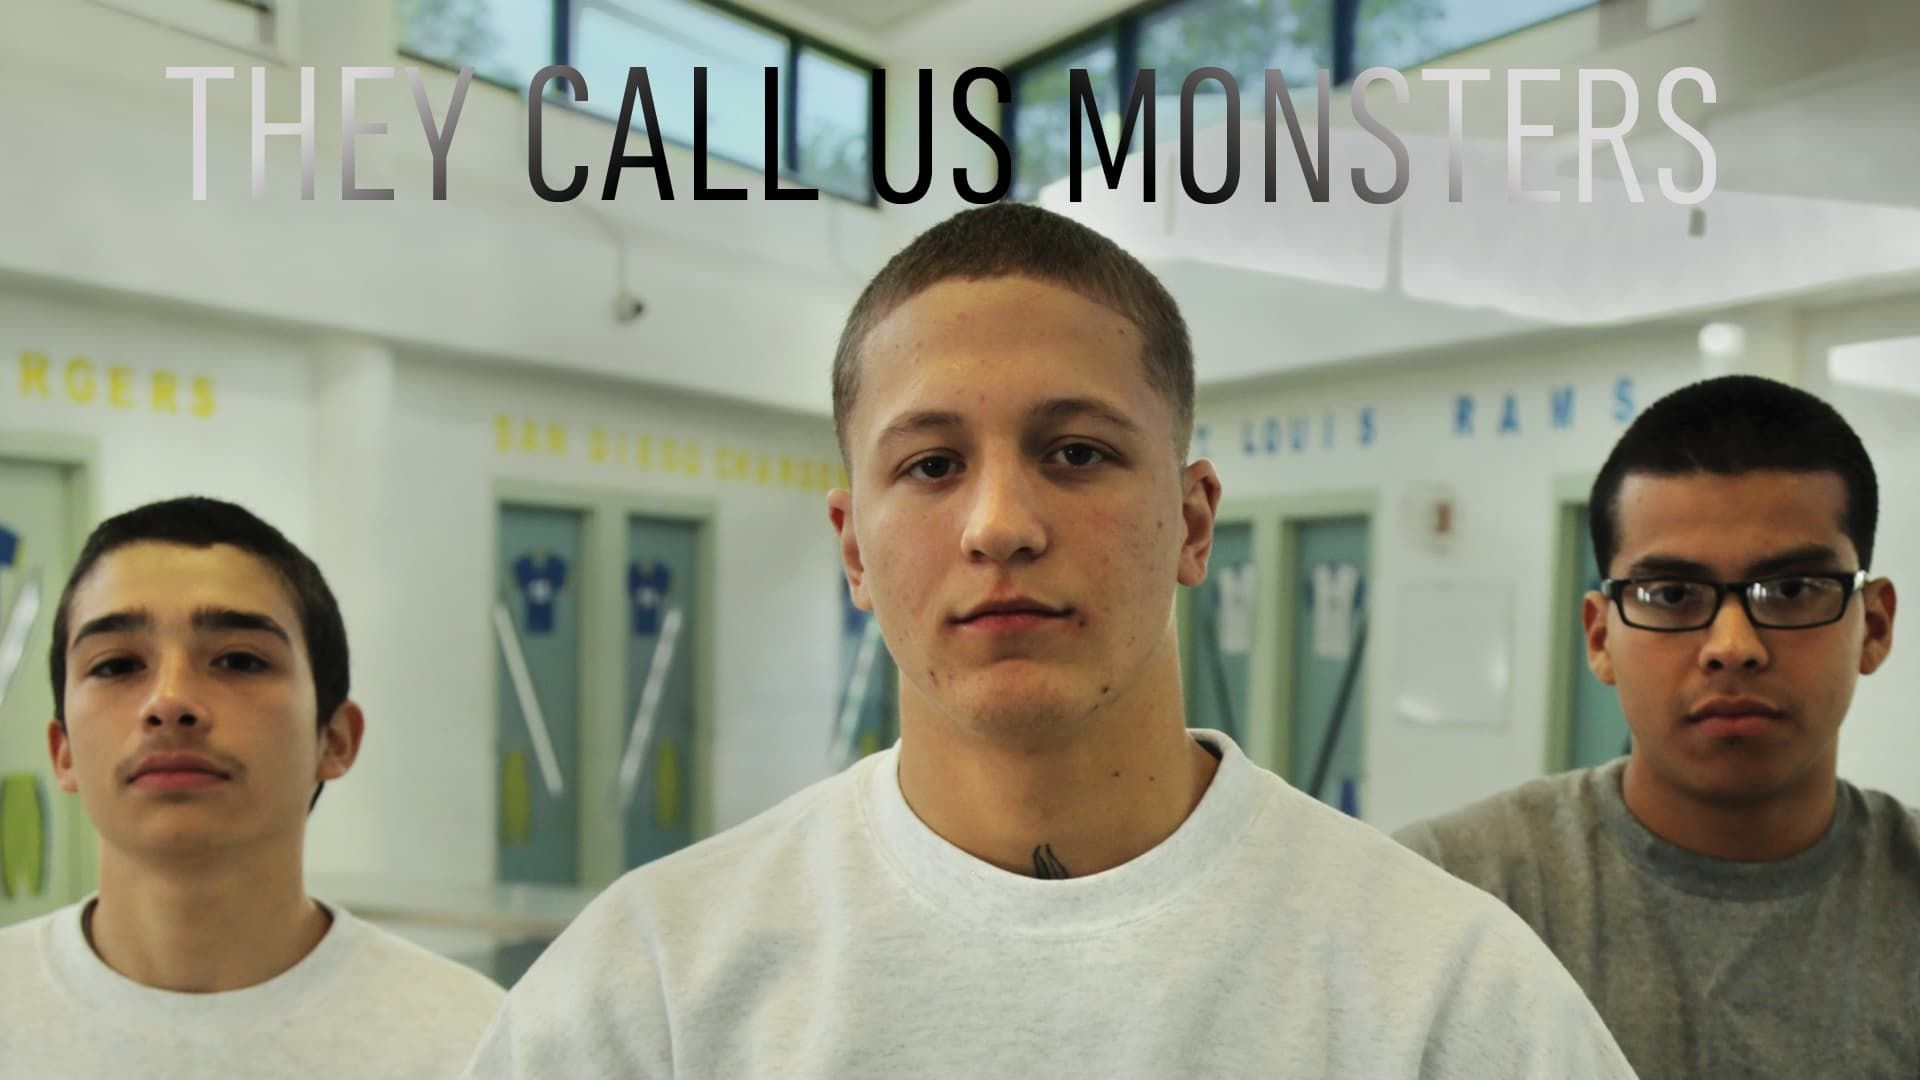 They Call Us Monsters background